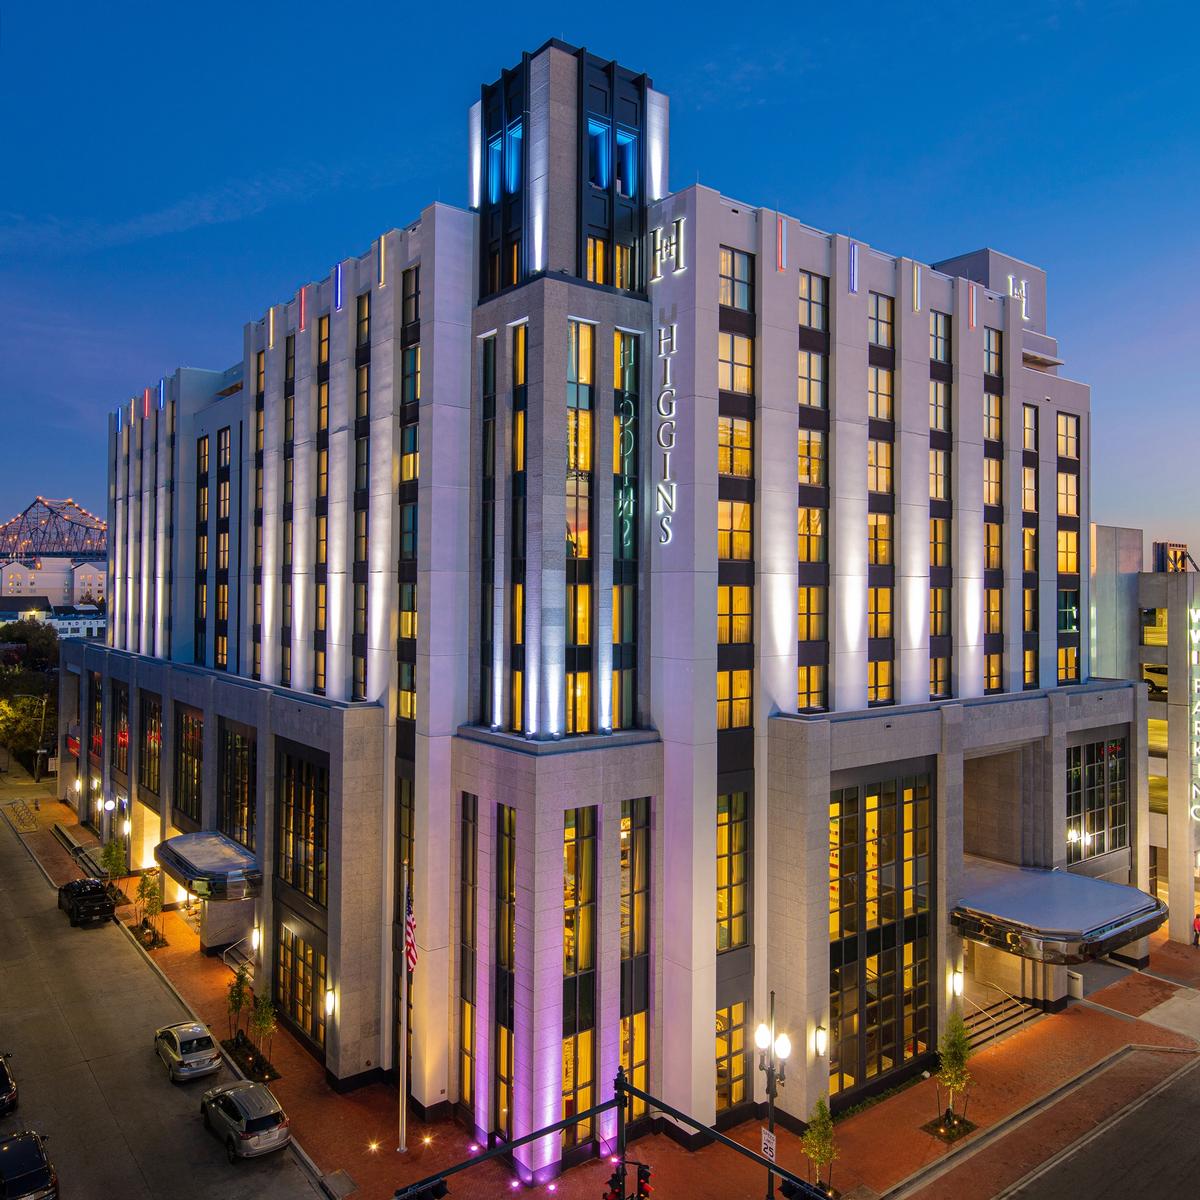 The hotel is located in the Arts and Warehouse District of New Orleans / Hilton